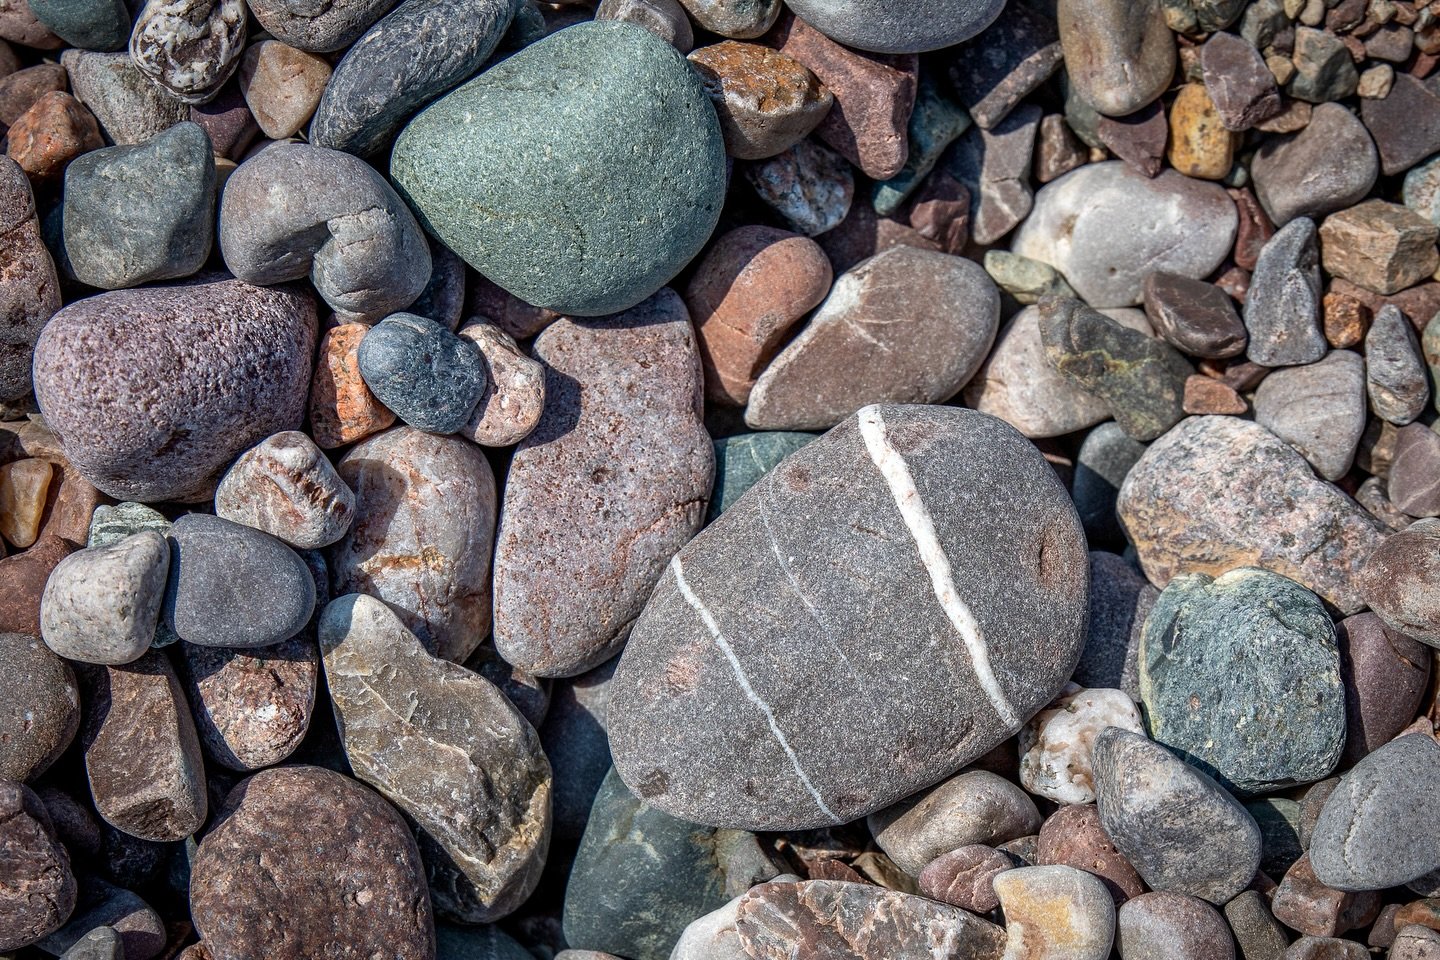 Treasure your time in Fundy-St. Martins, then before you leave take one last walk on the beach and hunt for a wishing stone. Keep an eye out for rocks that have an unbroken line all the way around. The stripe is usually quartz or calcite. When you fi